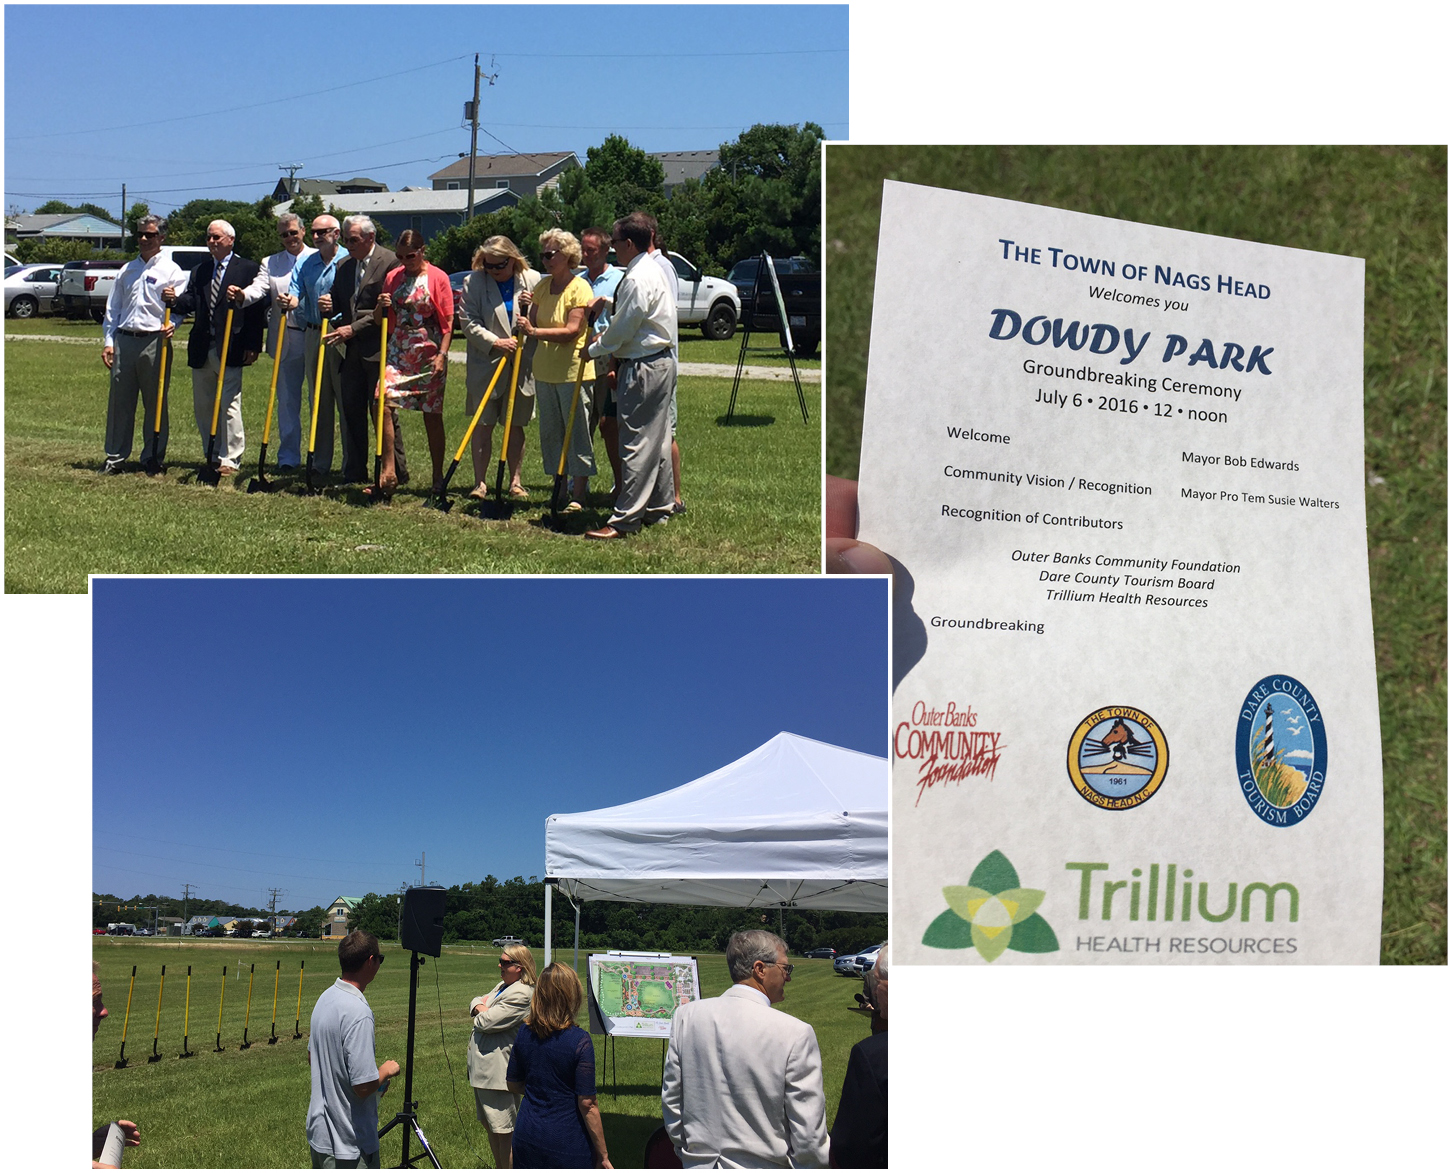 Town of Nags Head Dowdy Park Groundbreaking Ceremony